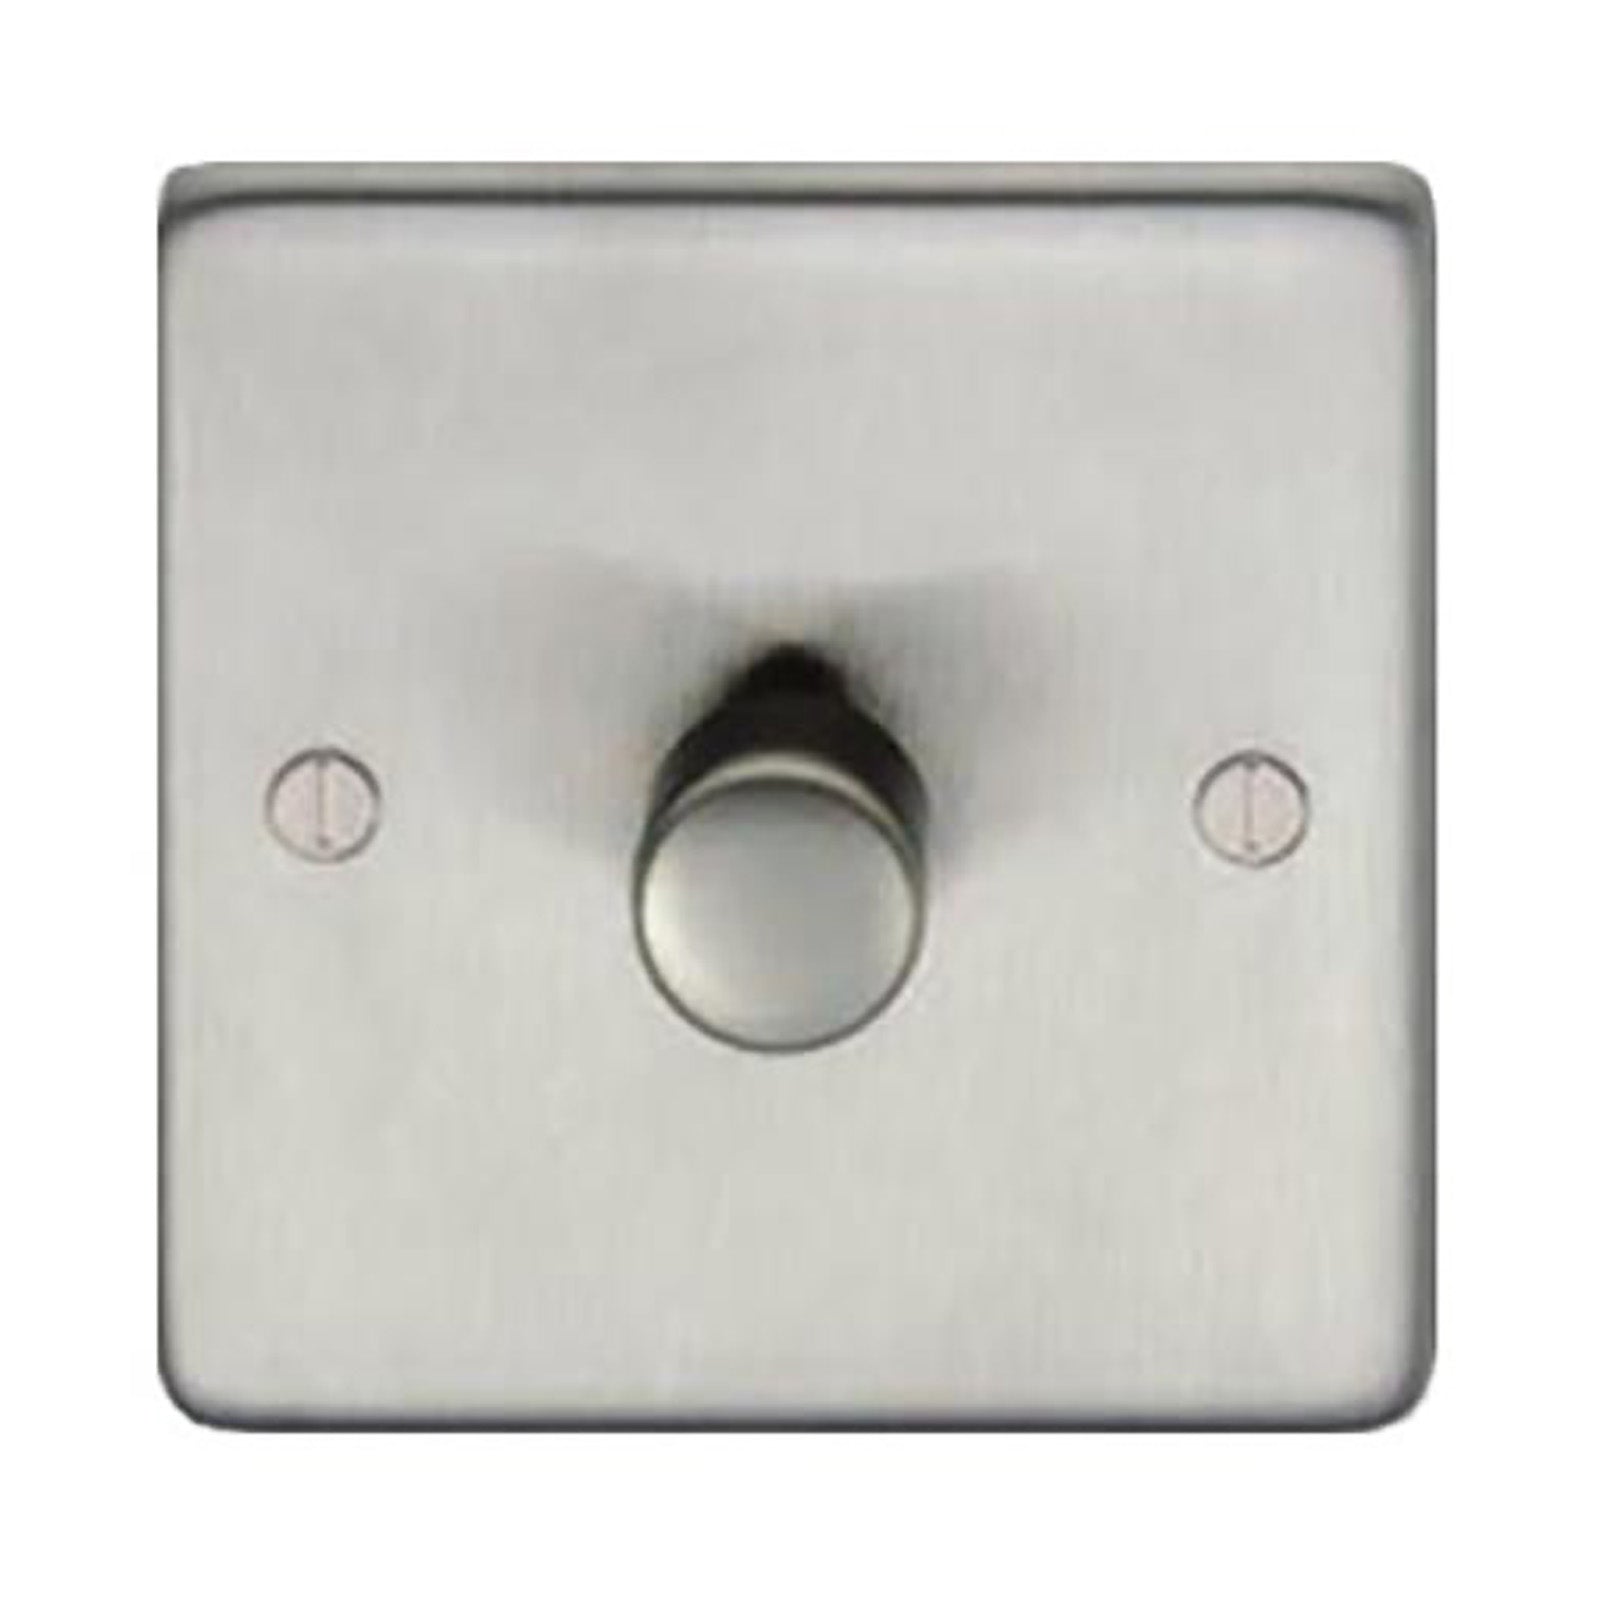 SHOW Image of Single LED Dimmer Switch with Satin Stainless Steel finish